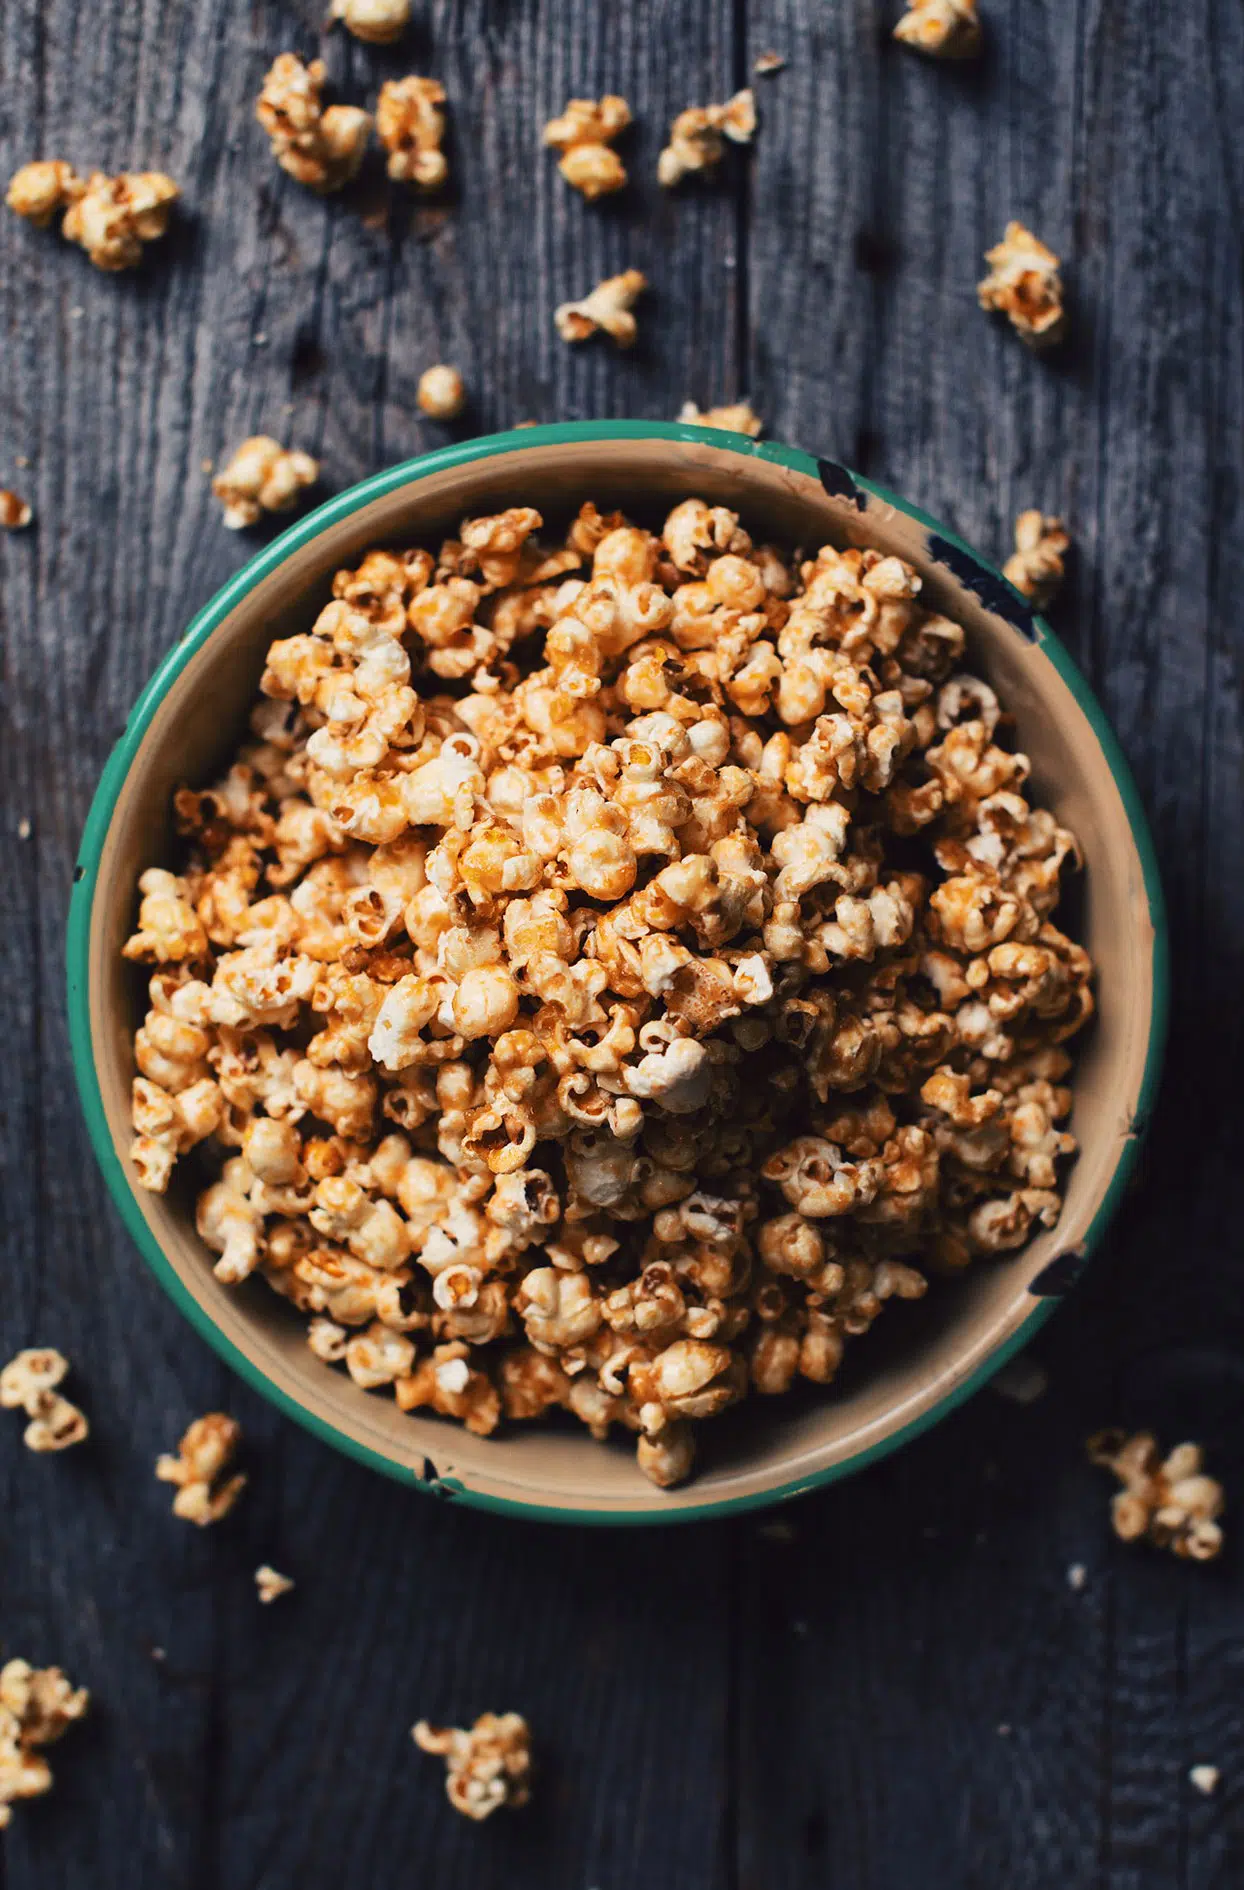 Popcorn with maple and Sortilège caramel